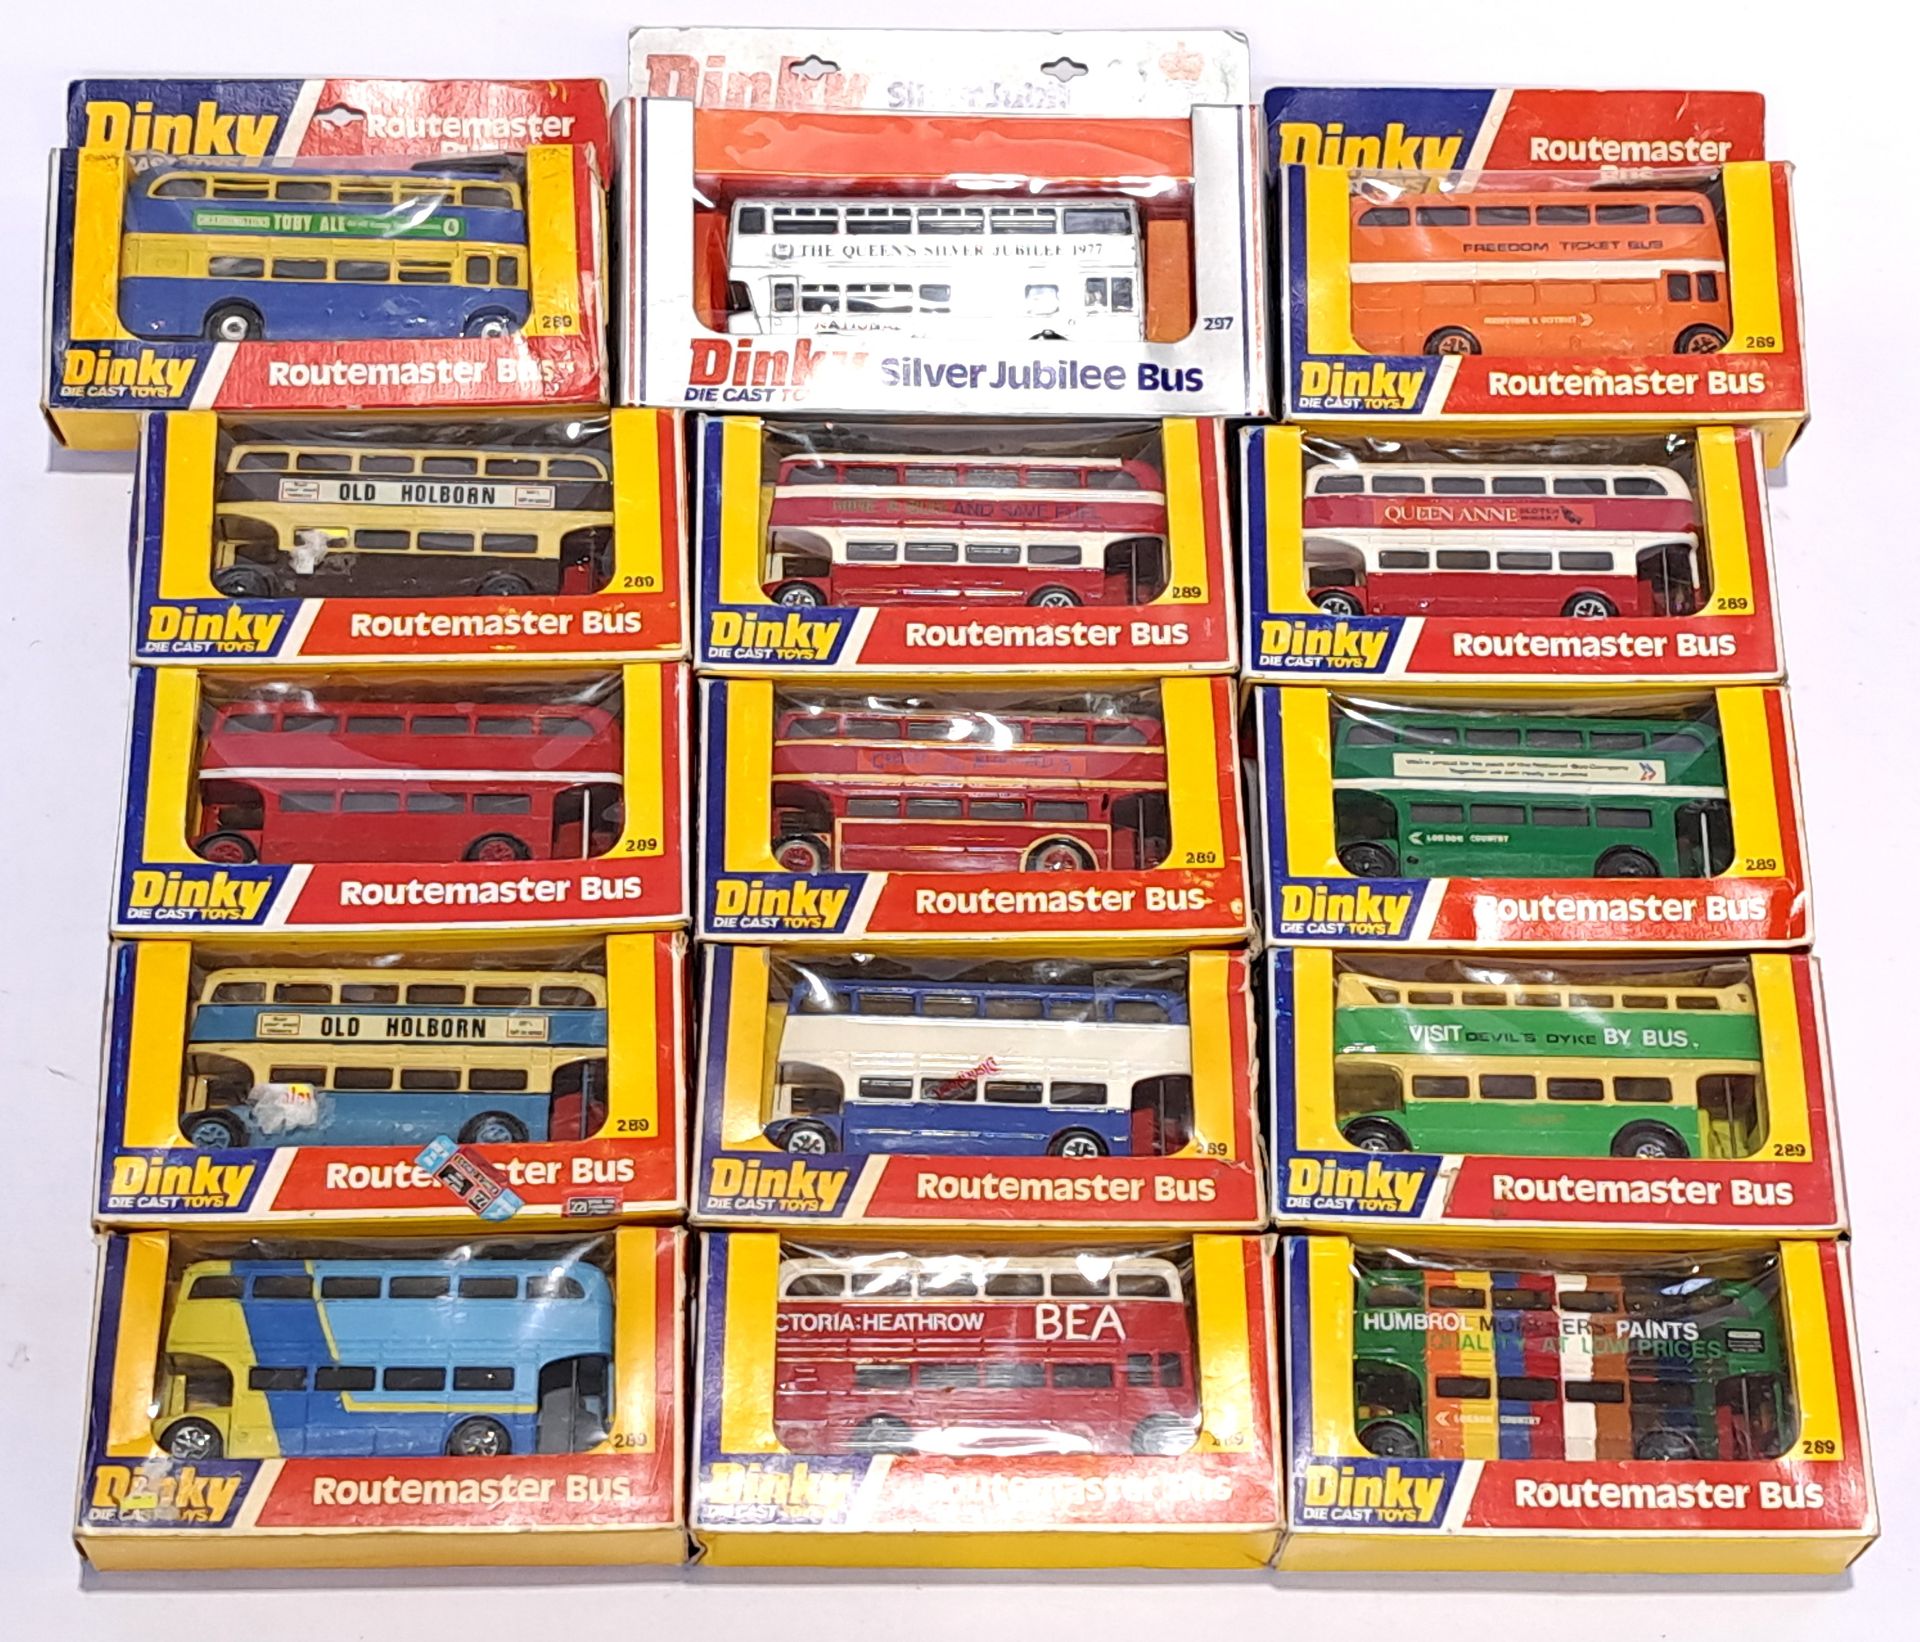 Dinky, a boxed Routemaster bus group